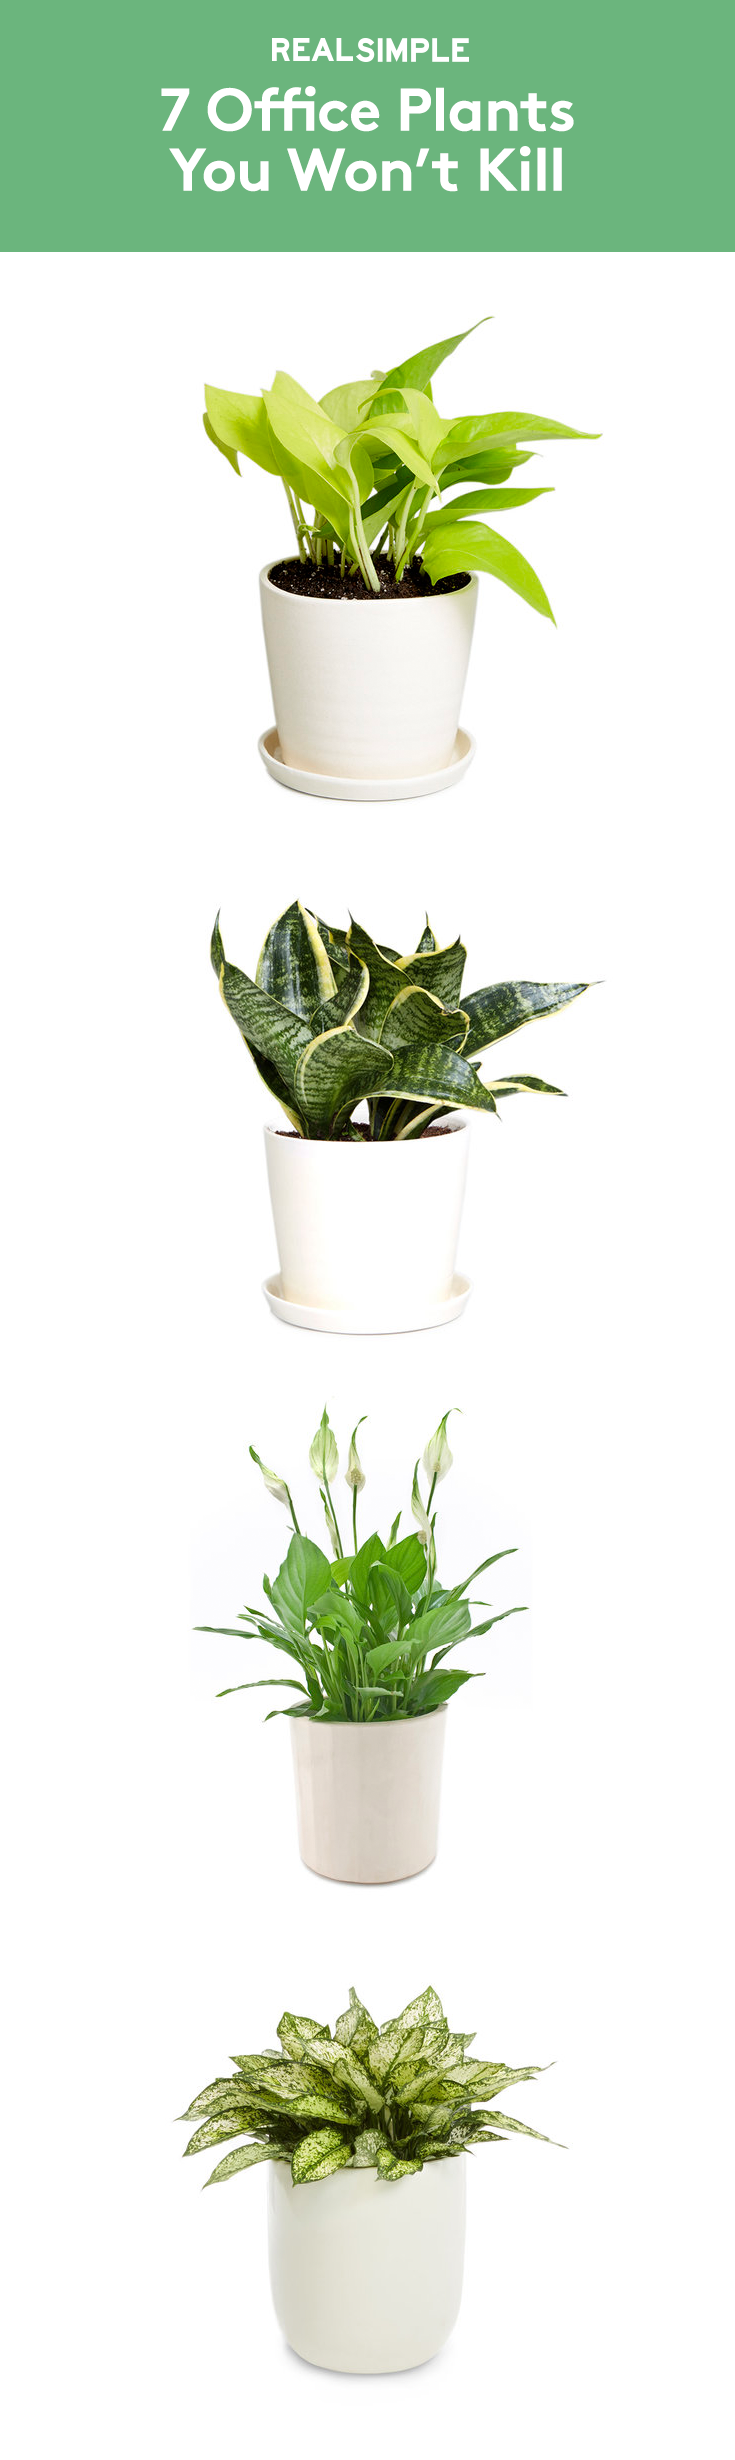 7 Office Plants You Won’t Kill | Fill your workspace with some greenery—it might make your workday better. Christopher Satch,